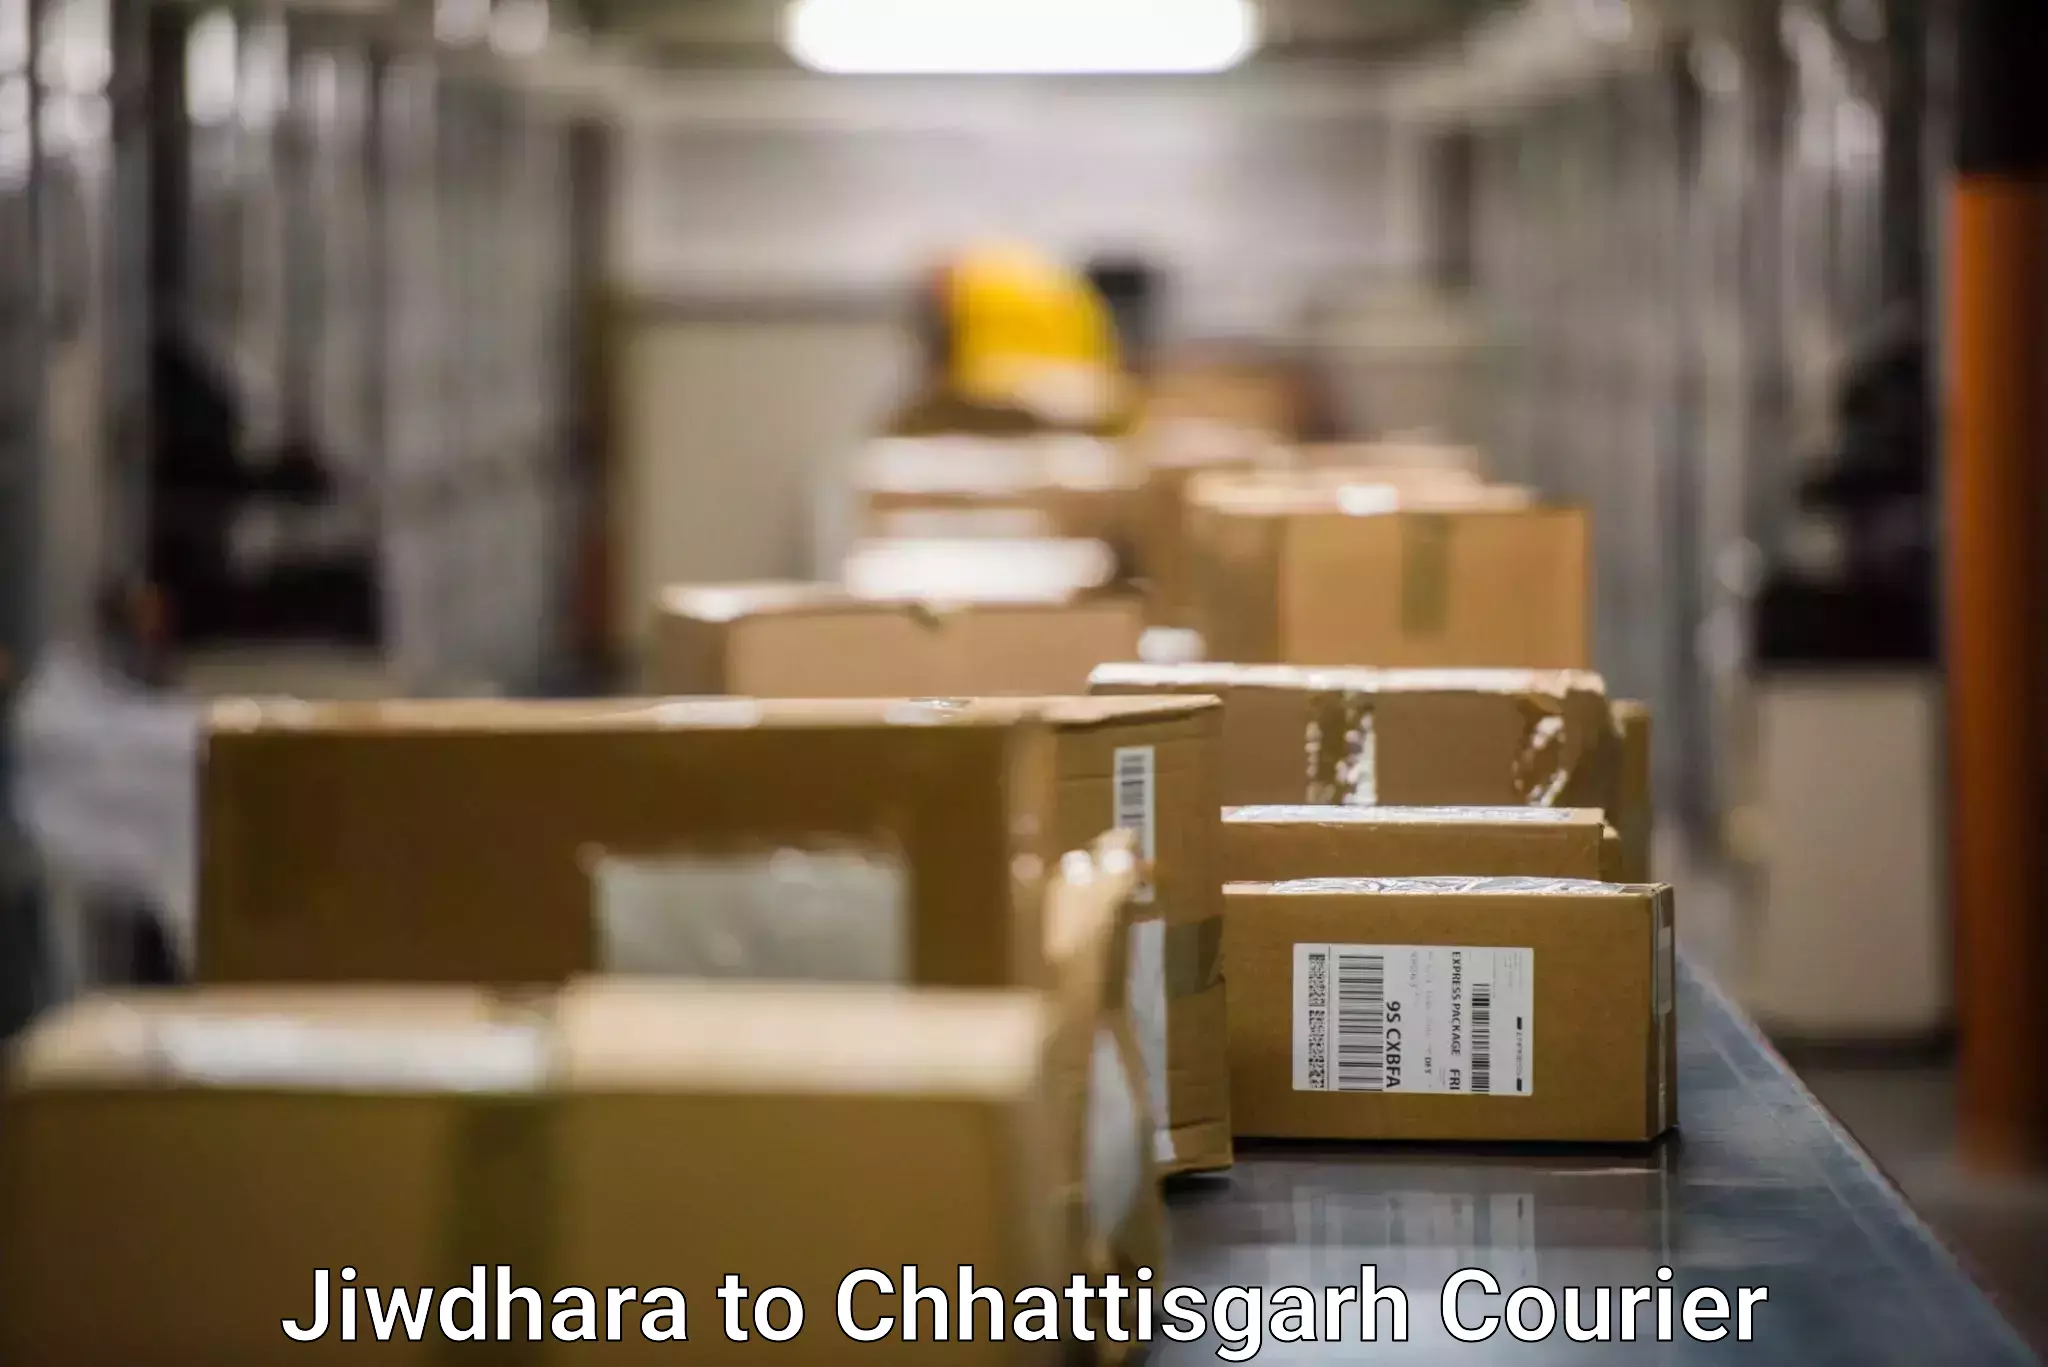 Next day courier in Jiwdhara to bagbahra